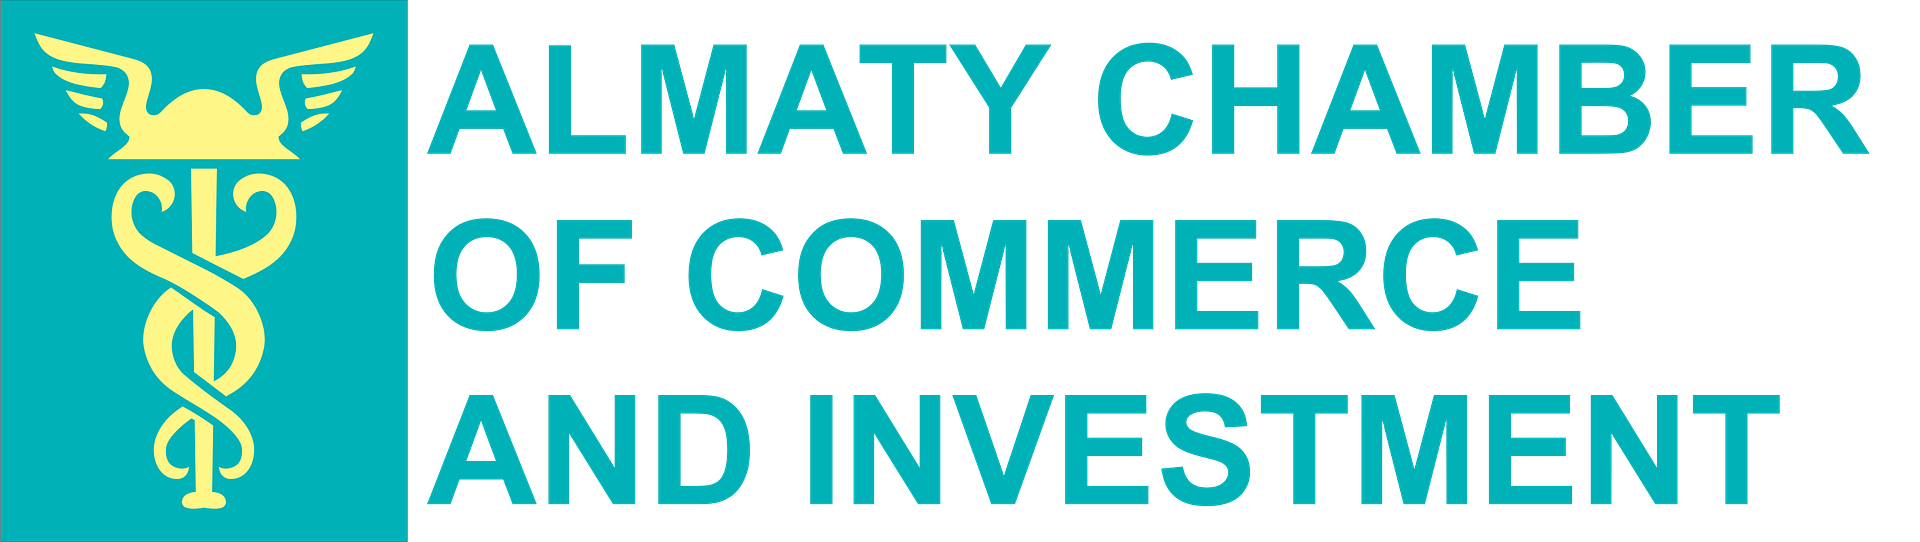 Almaty Chamber of Commerce and Investments